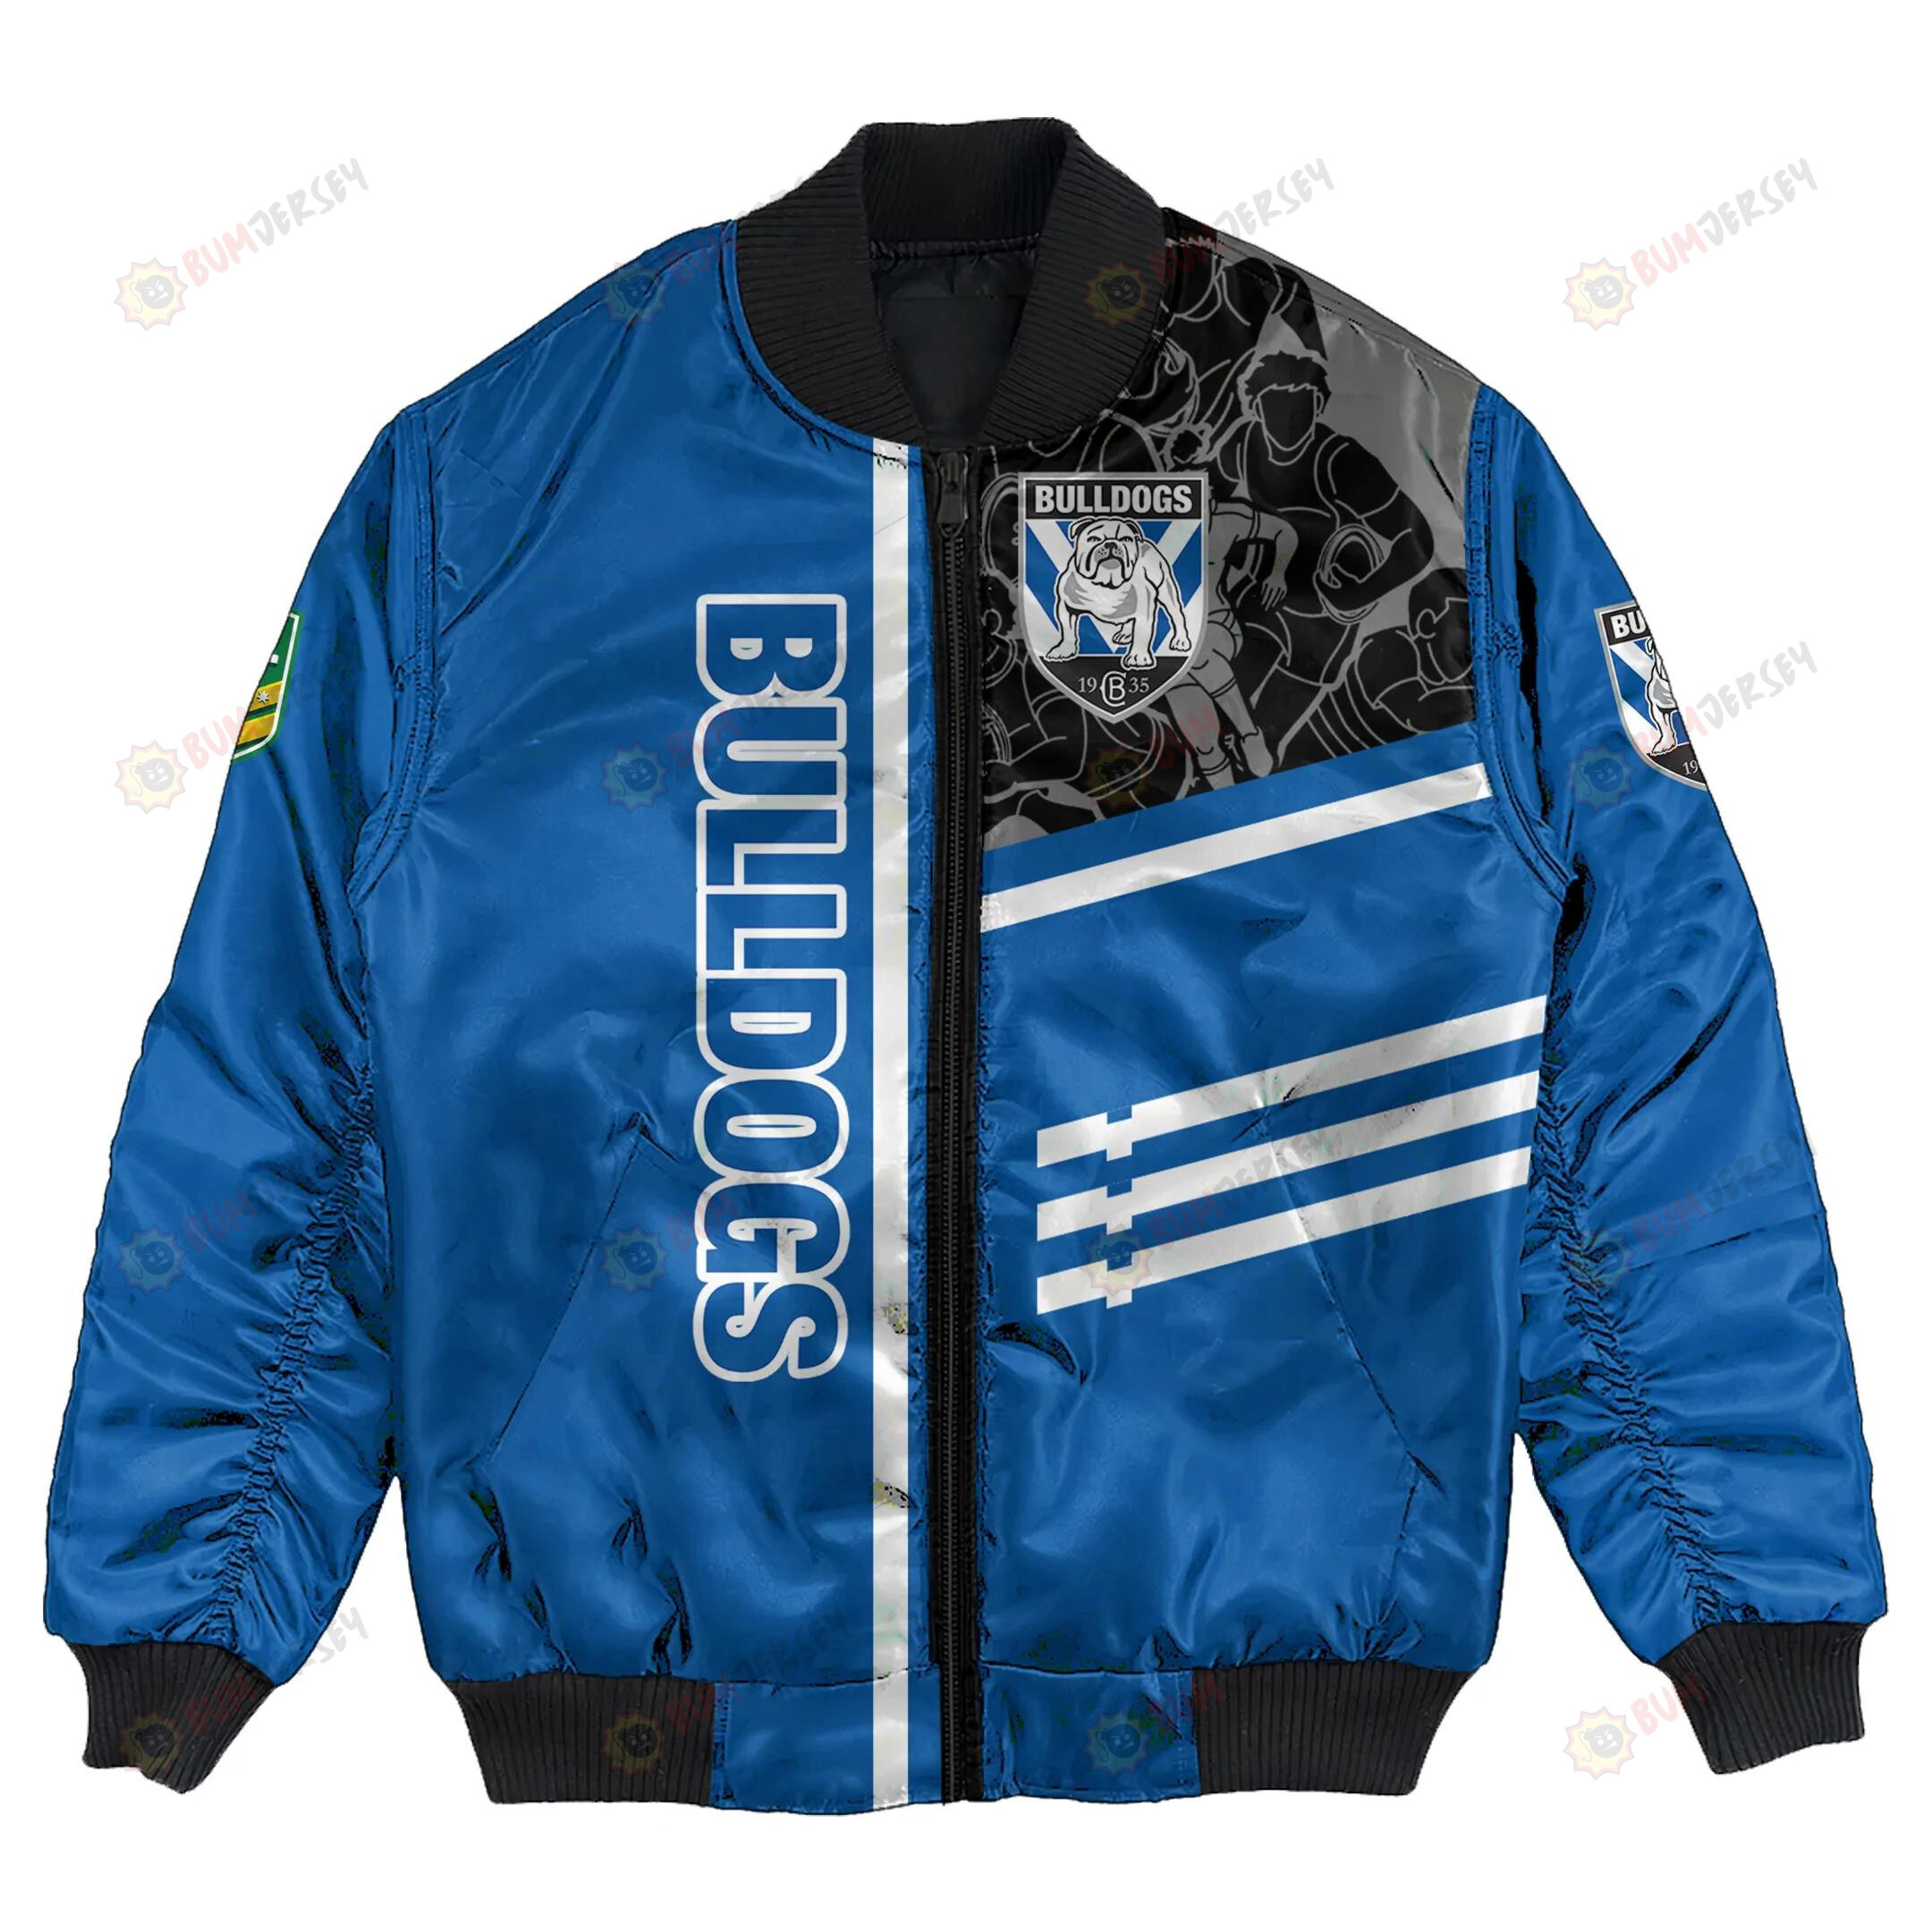 Canterbury-Bankstown Bulldogs Bomber Jacket 3D Printed Personalized Rugby For Fan